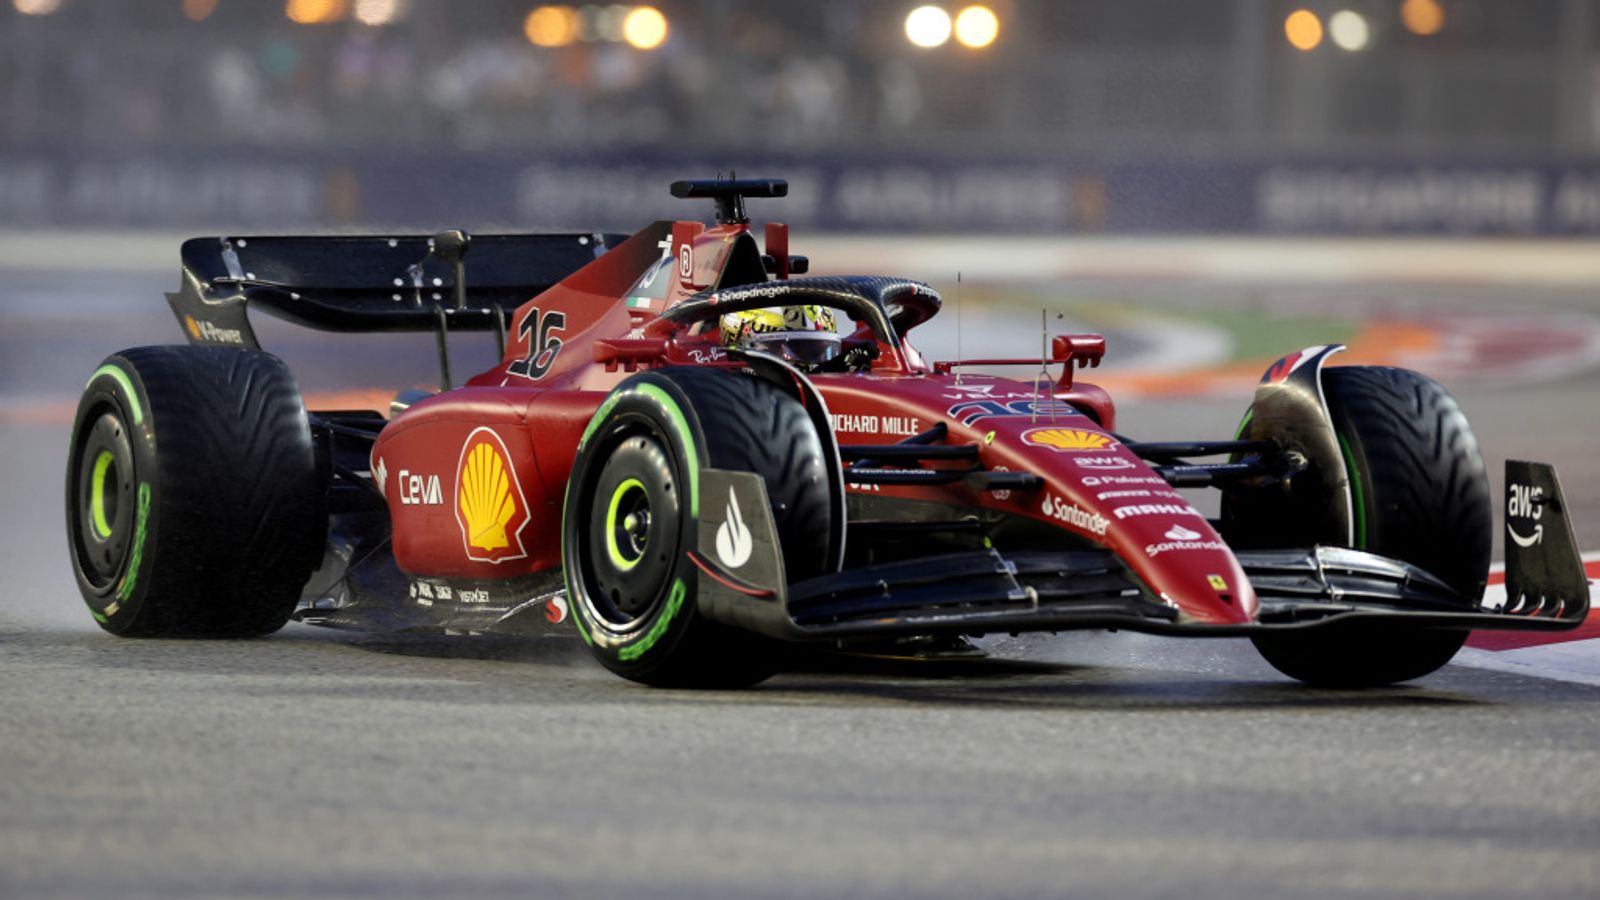 Singapore GP: Charles Leclerc takes pole in thrilling qualifying as Max Verstappen finishes eighth